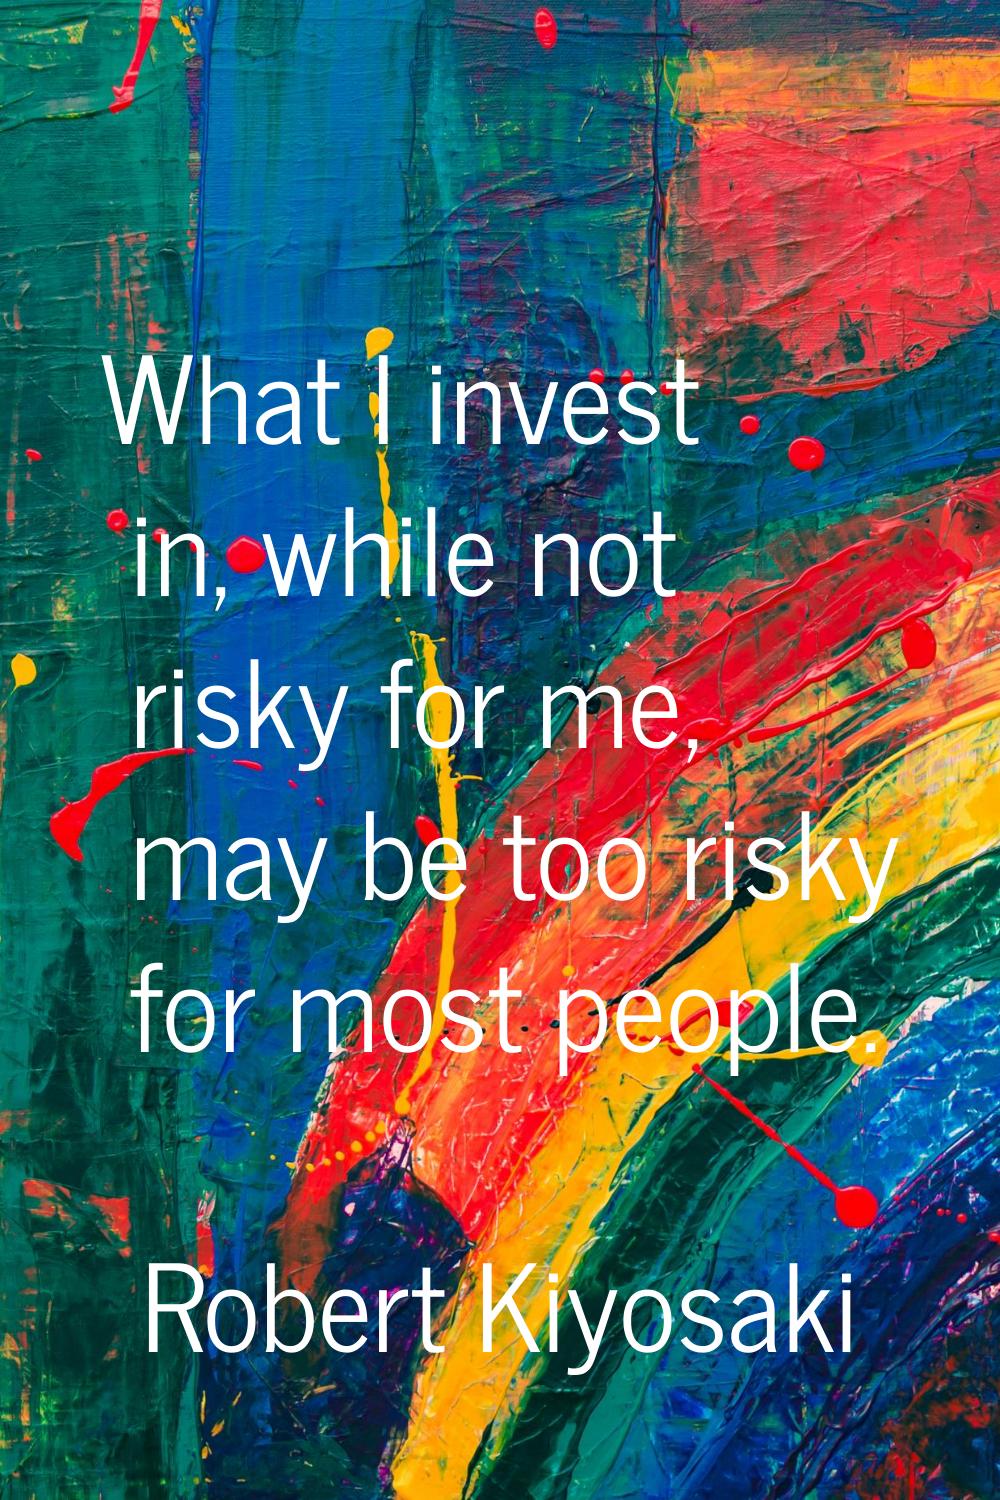 What I invest in, while not risky for me, may be too risky for most people.